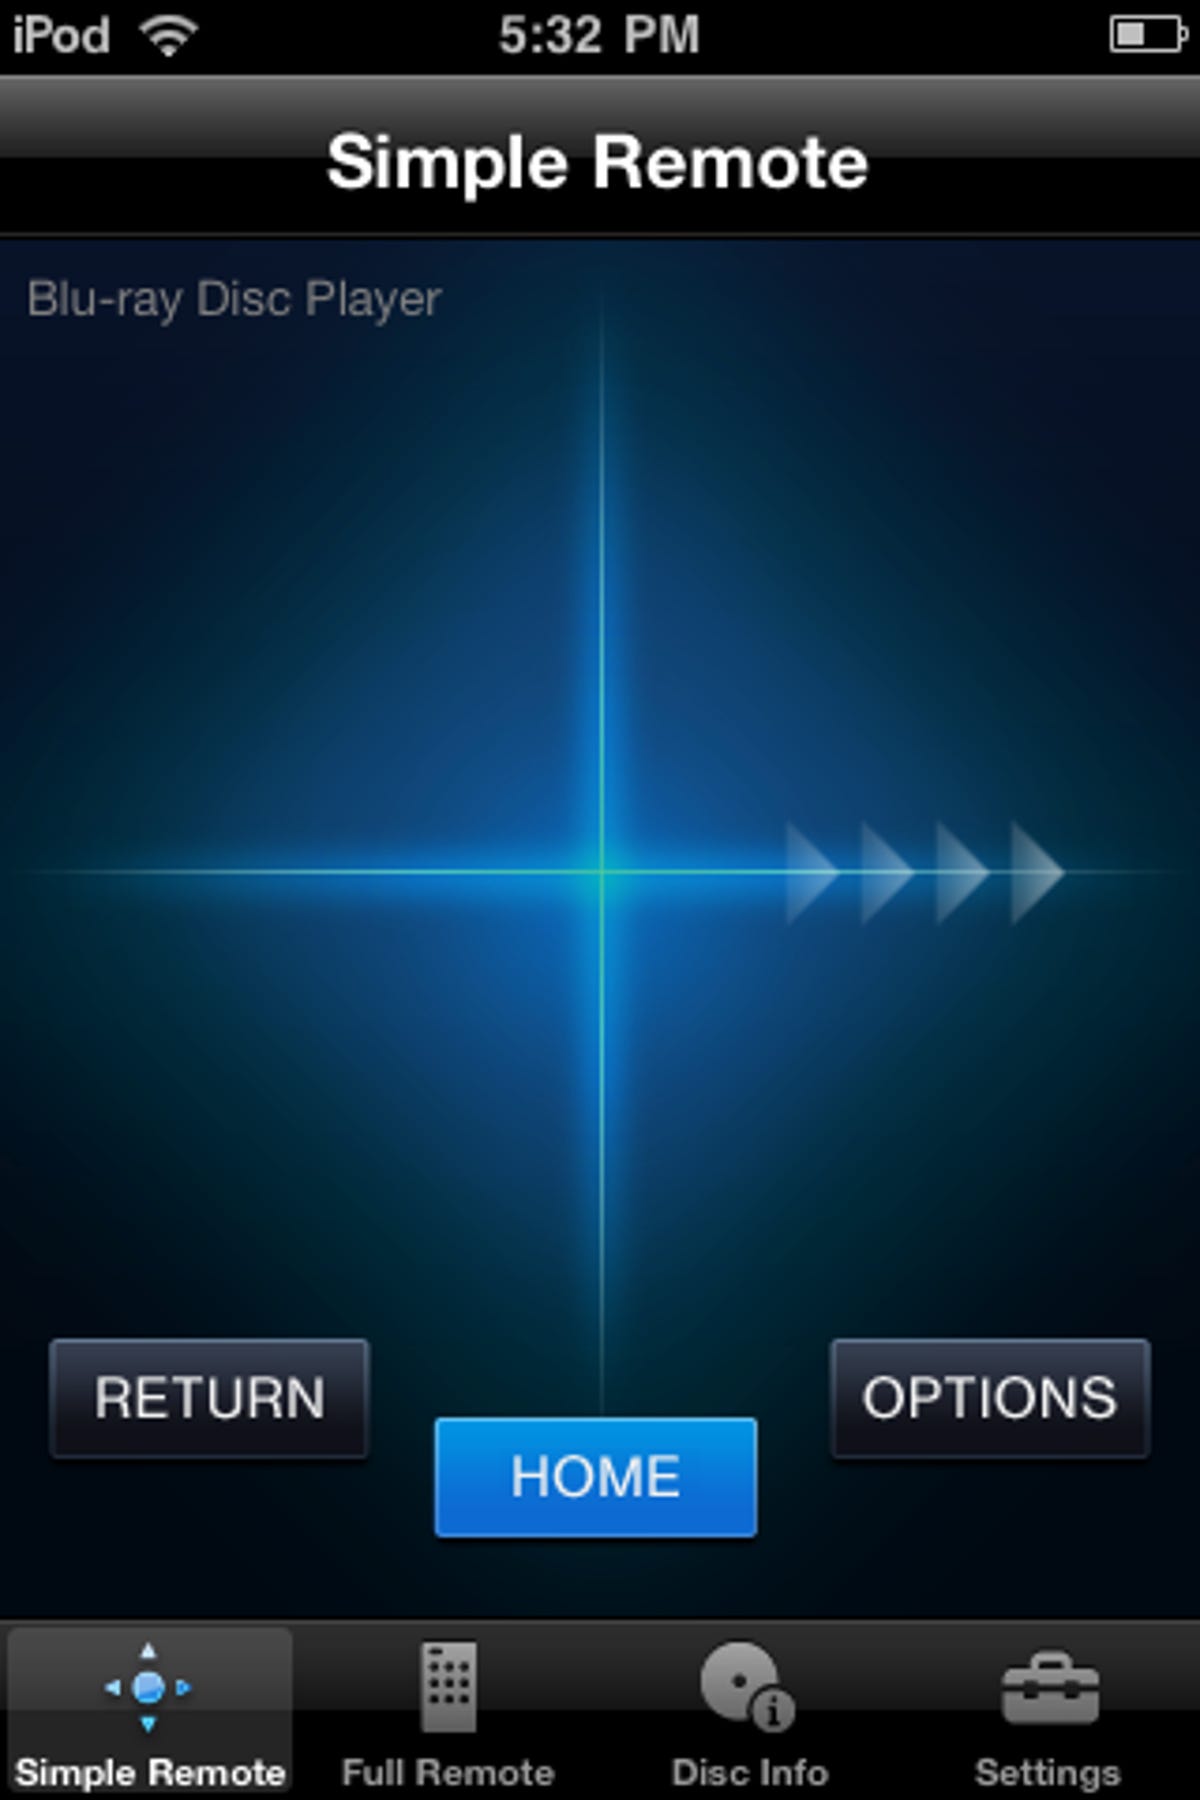 The Sony BDP-S570 iPhone app